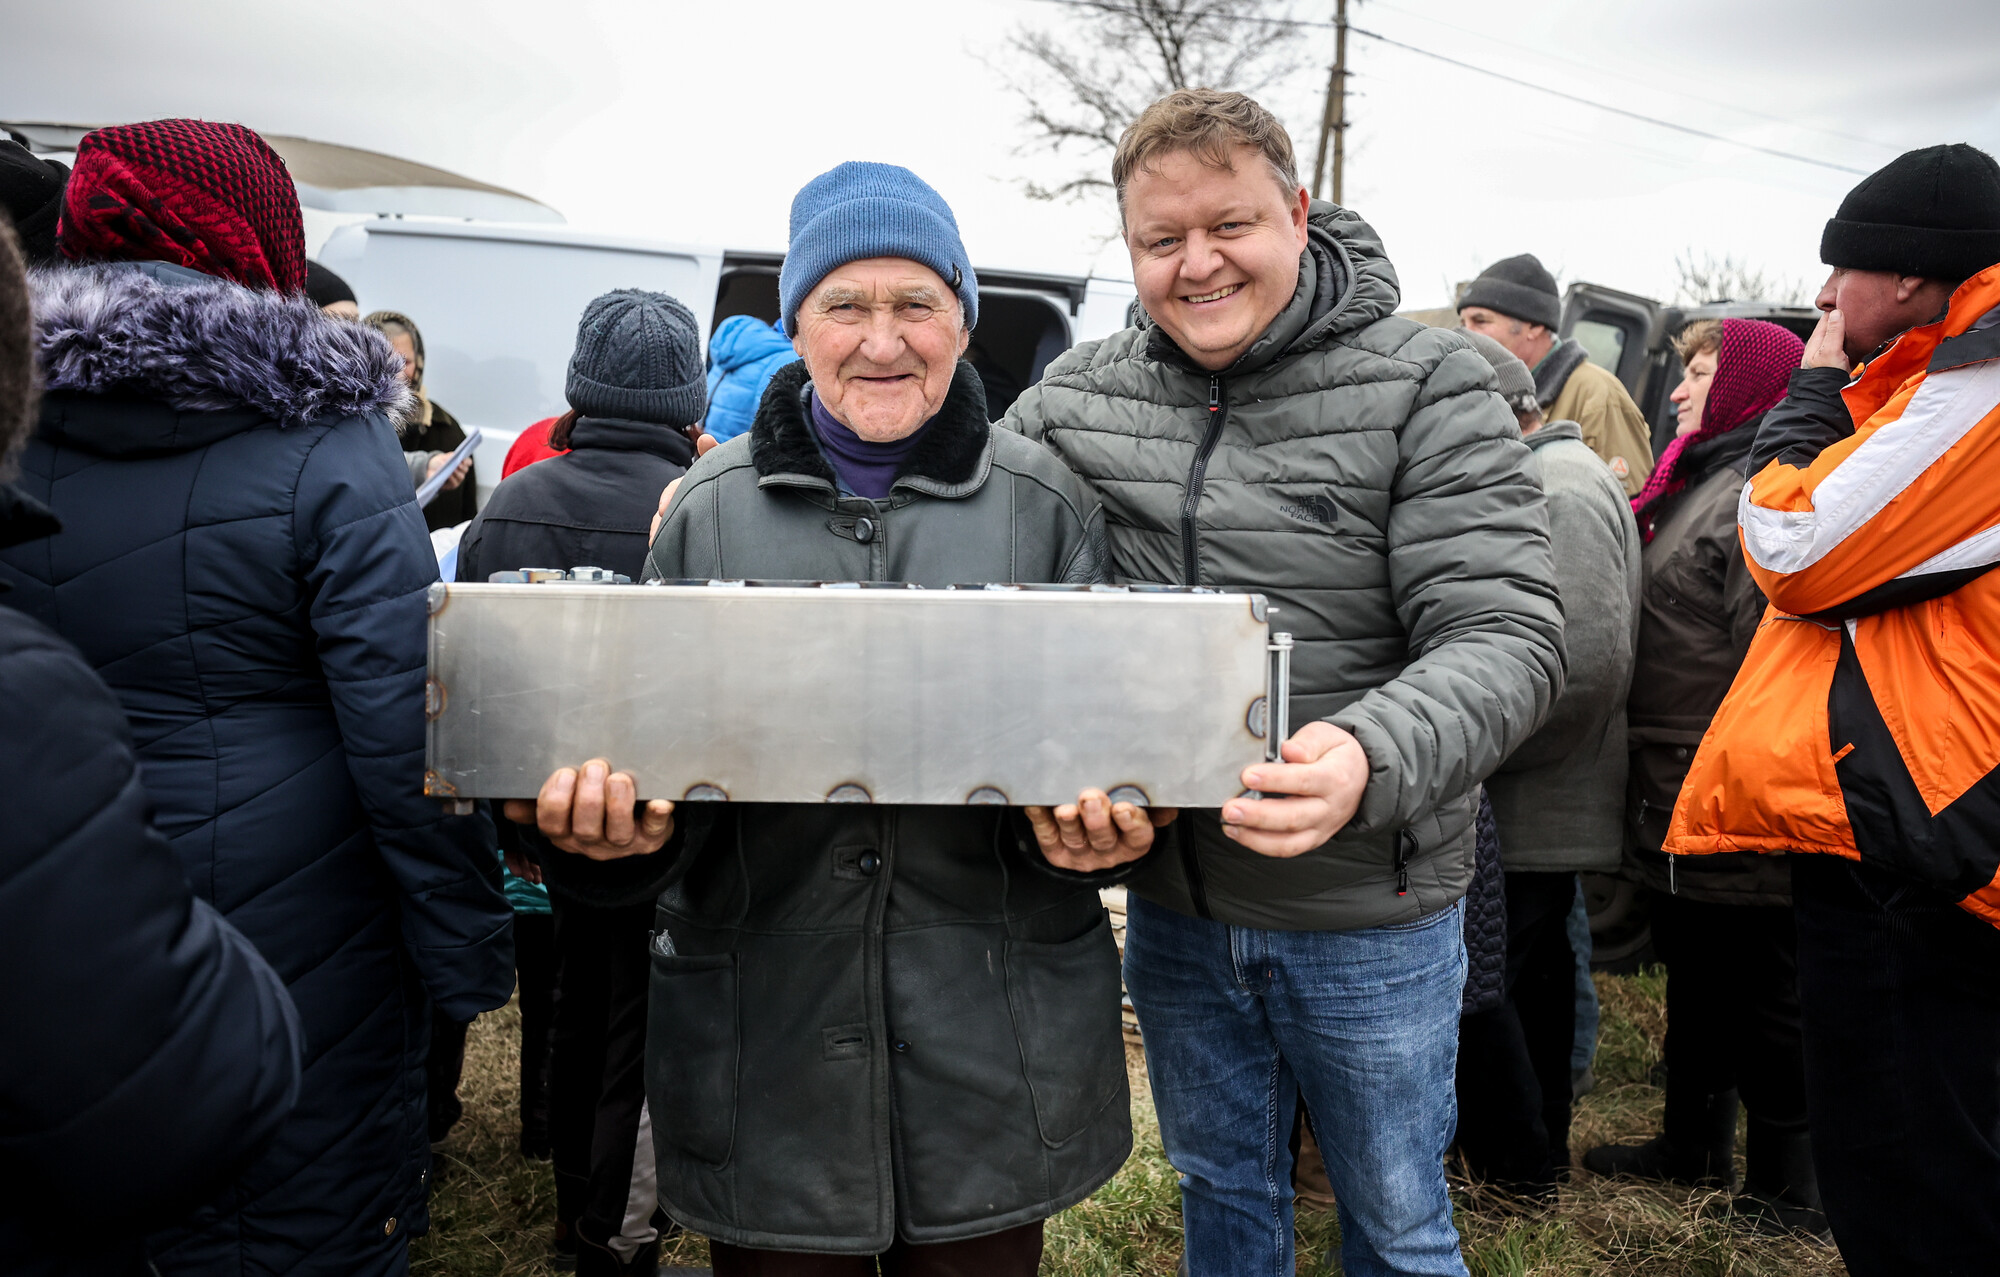 Two men holding a large metal box.